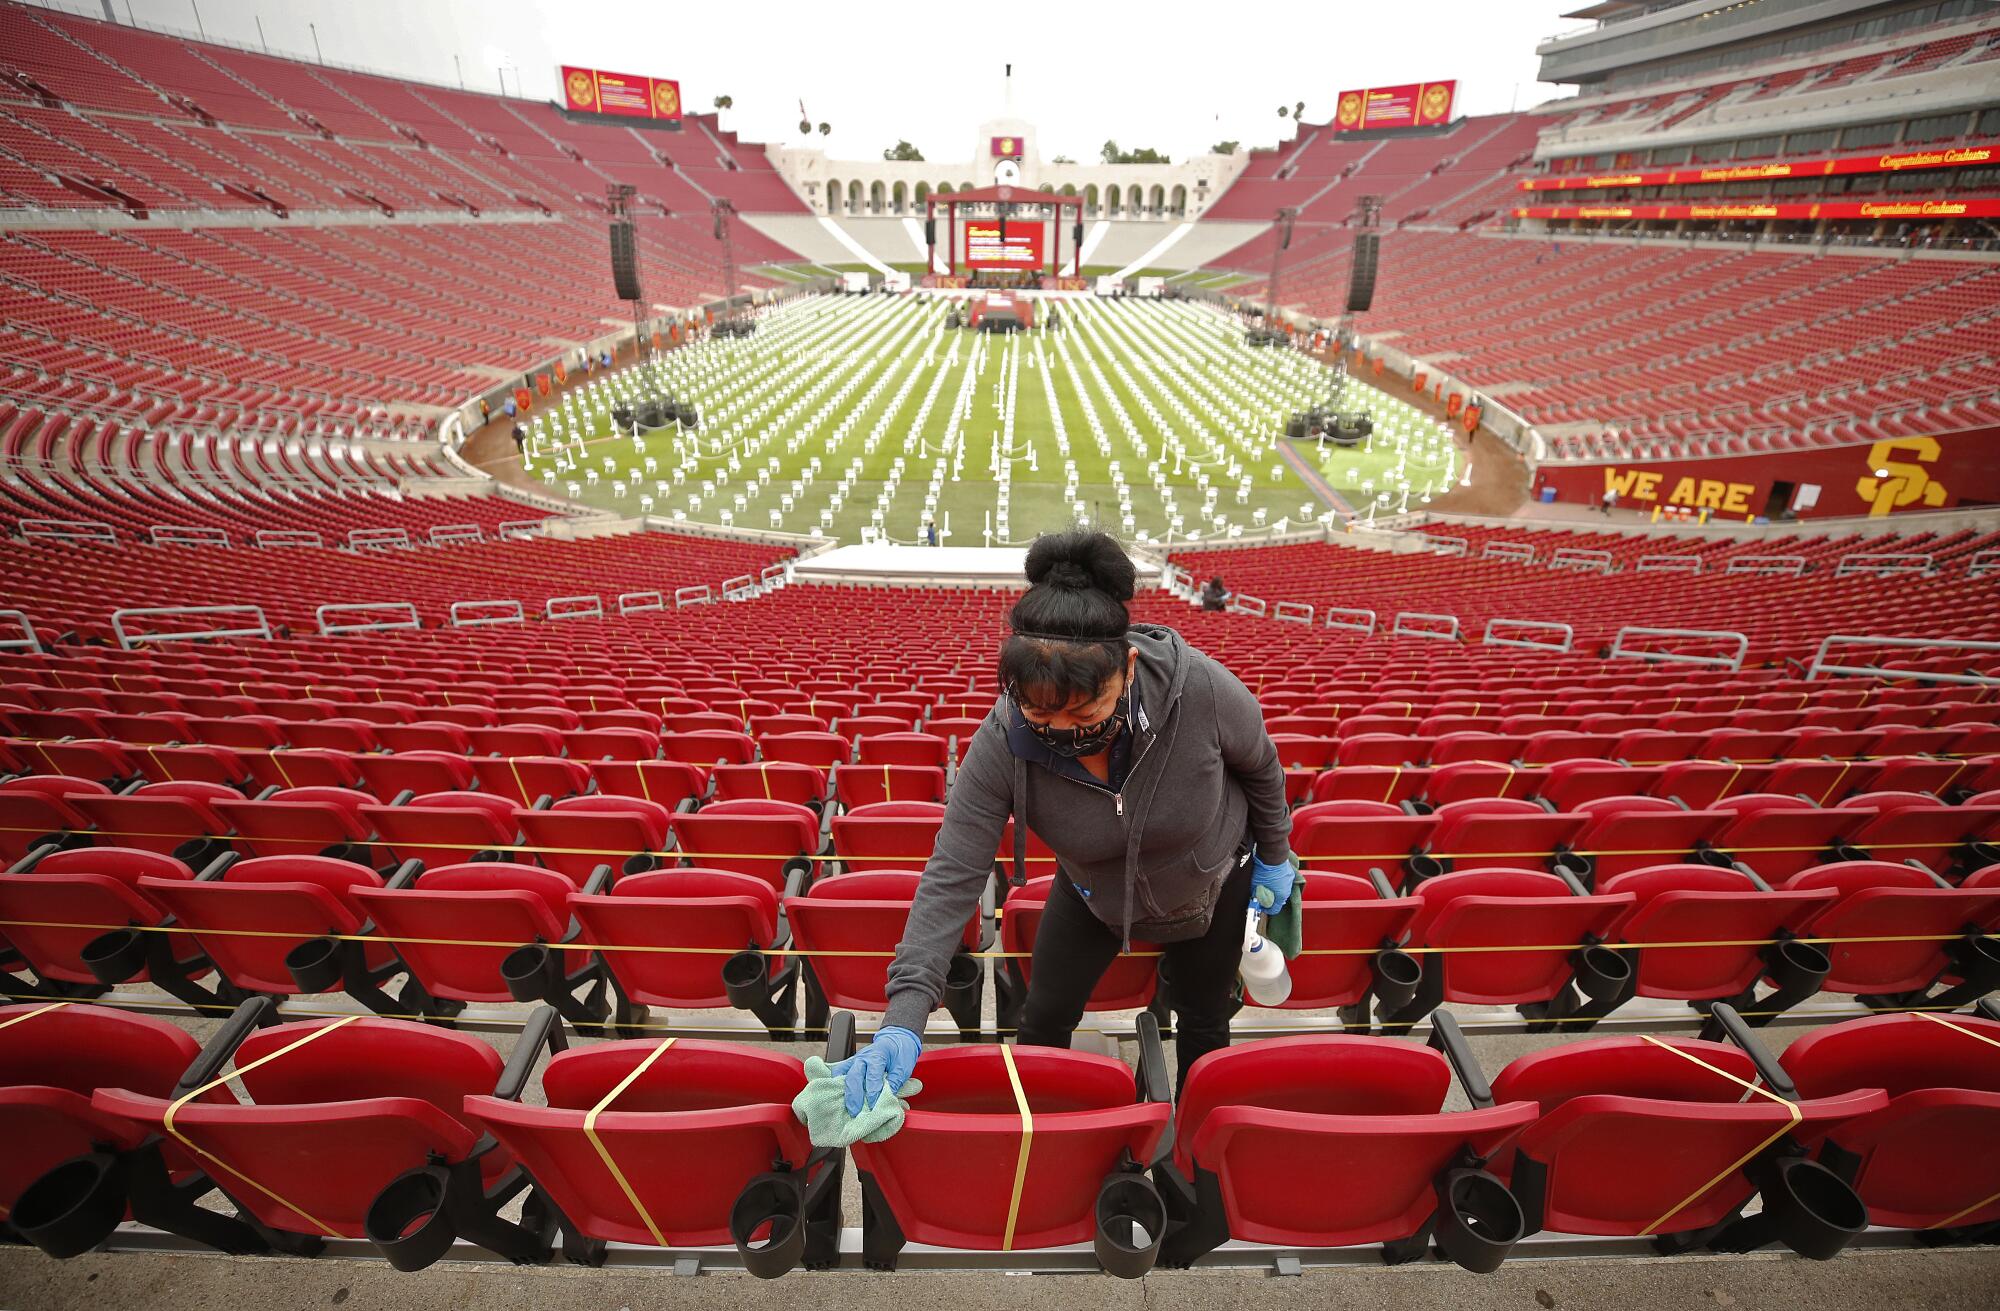 A woman wipes down red stadium chairs, some of them taped off for social distancing